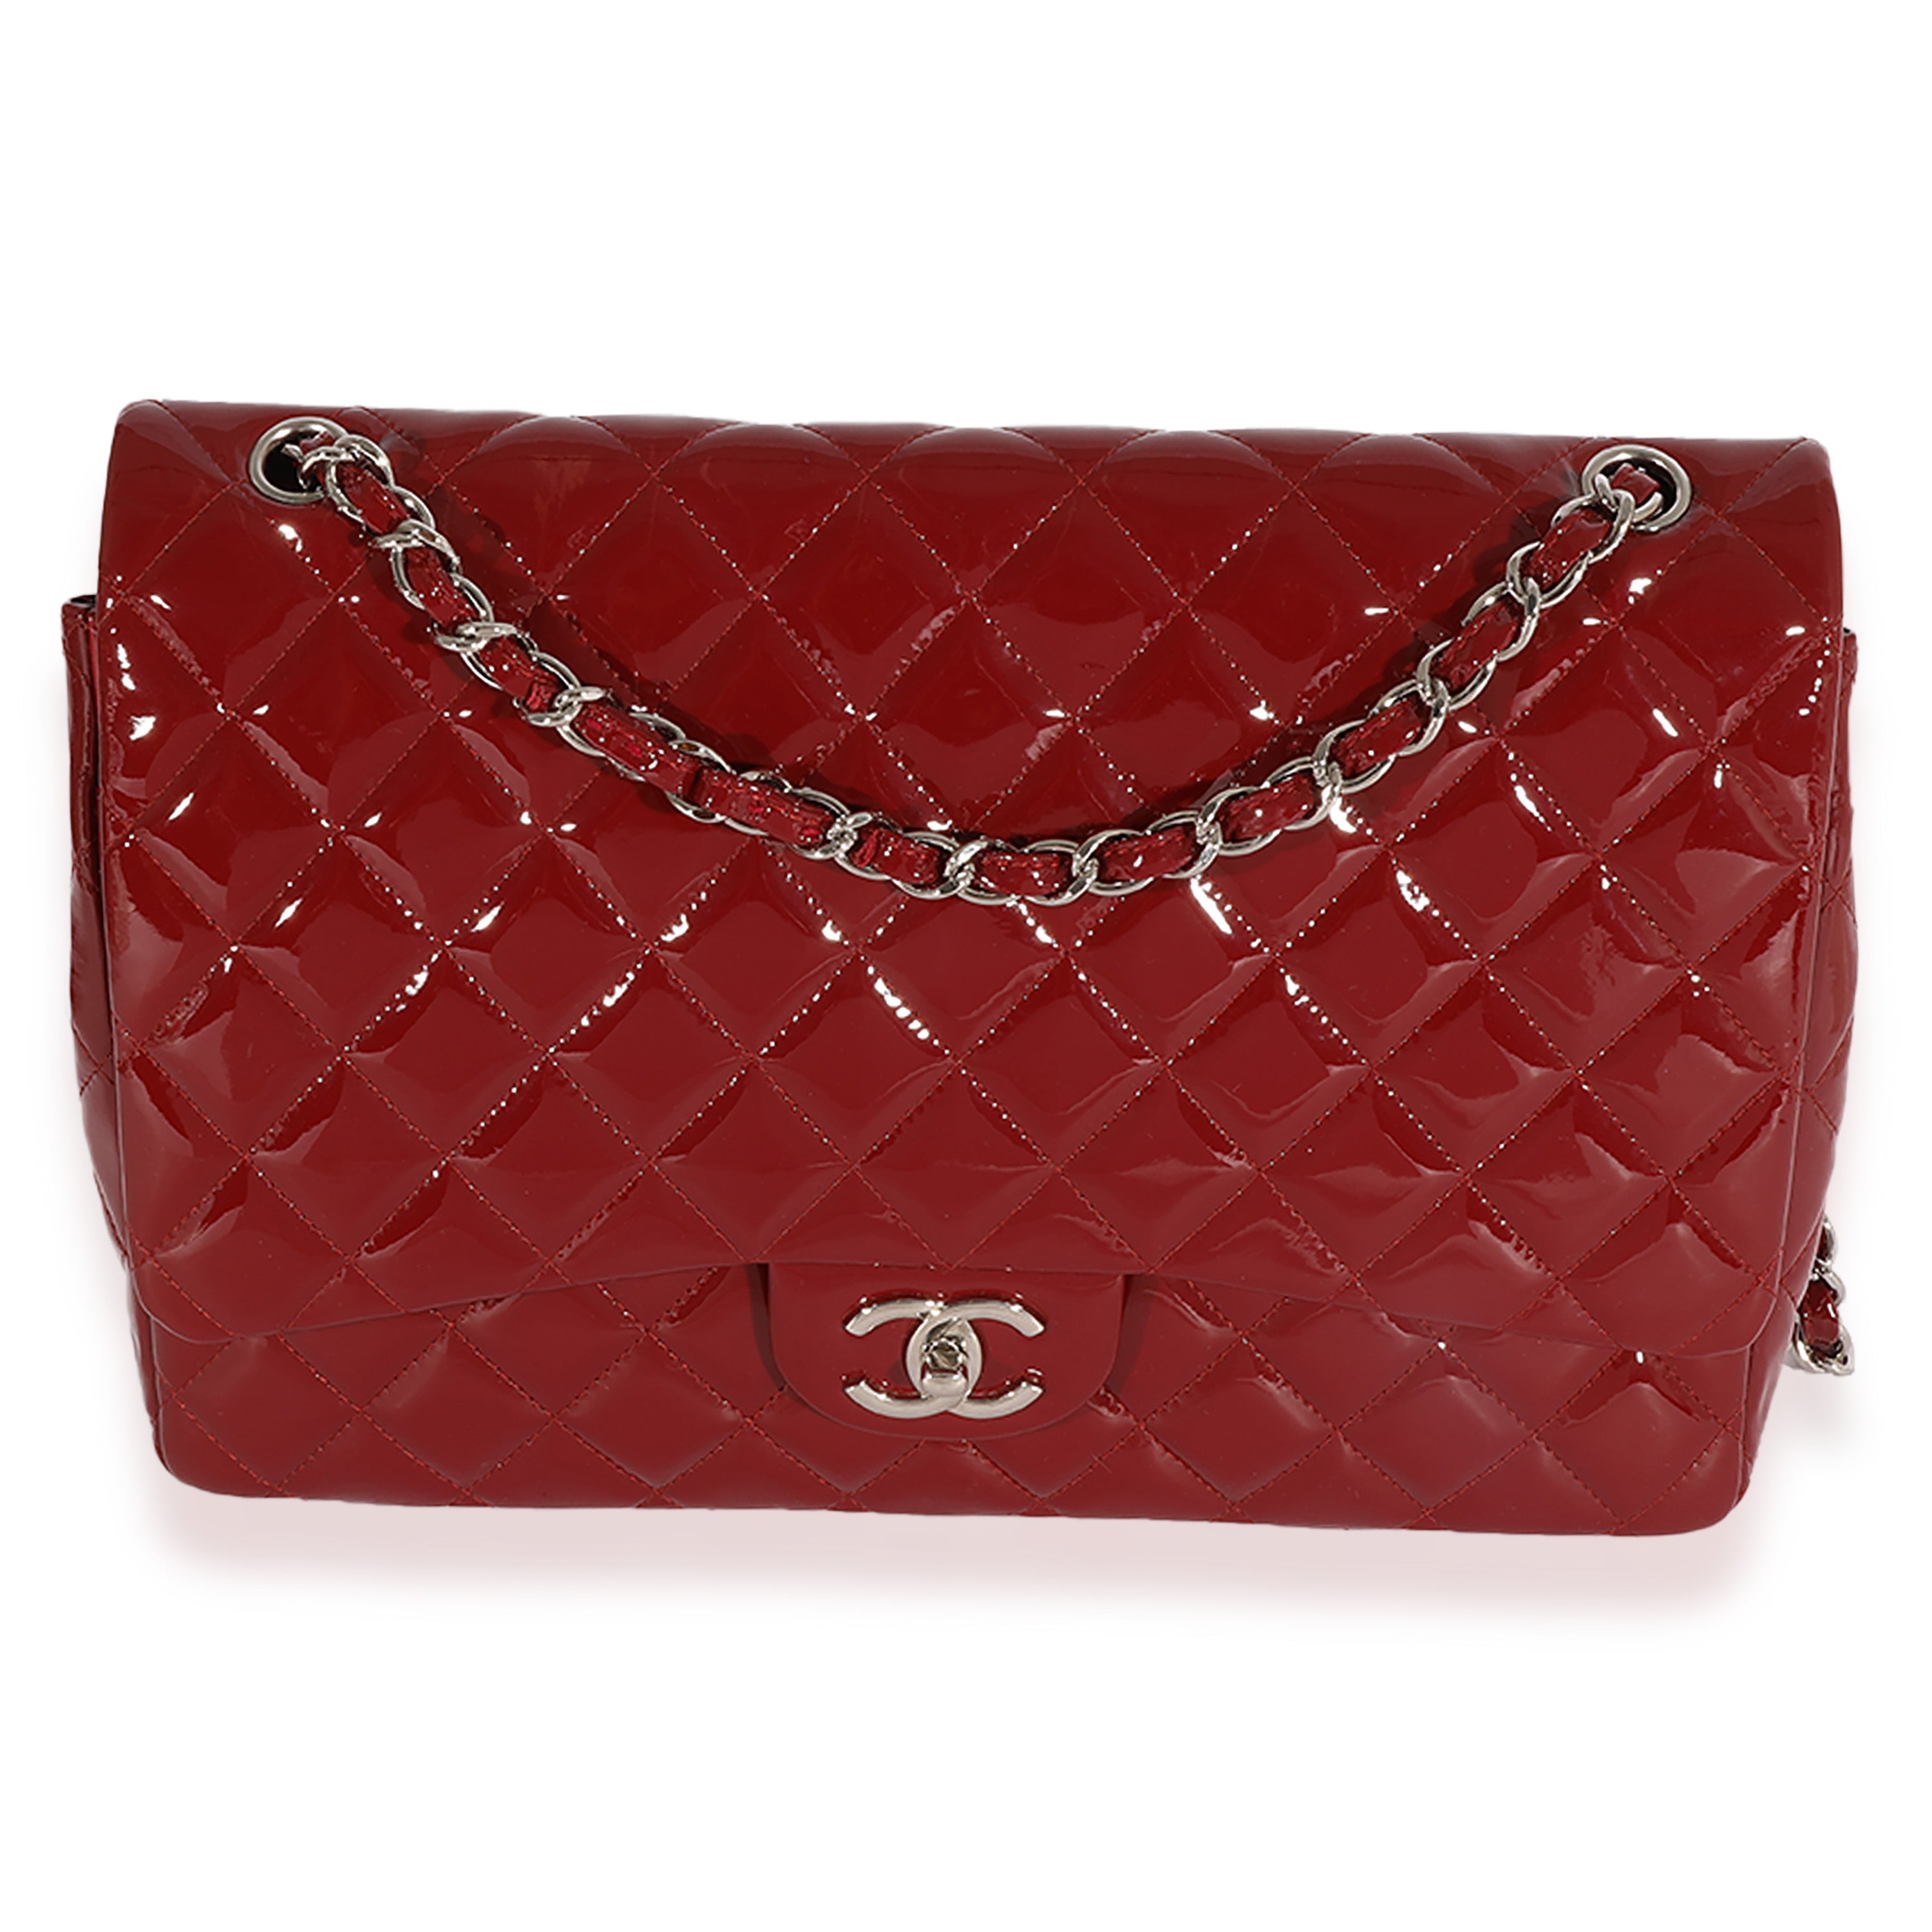 Chanel Dark Red Quilted Patent Leather Maxi Classic Double Flap Bag, myGemma, SG